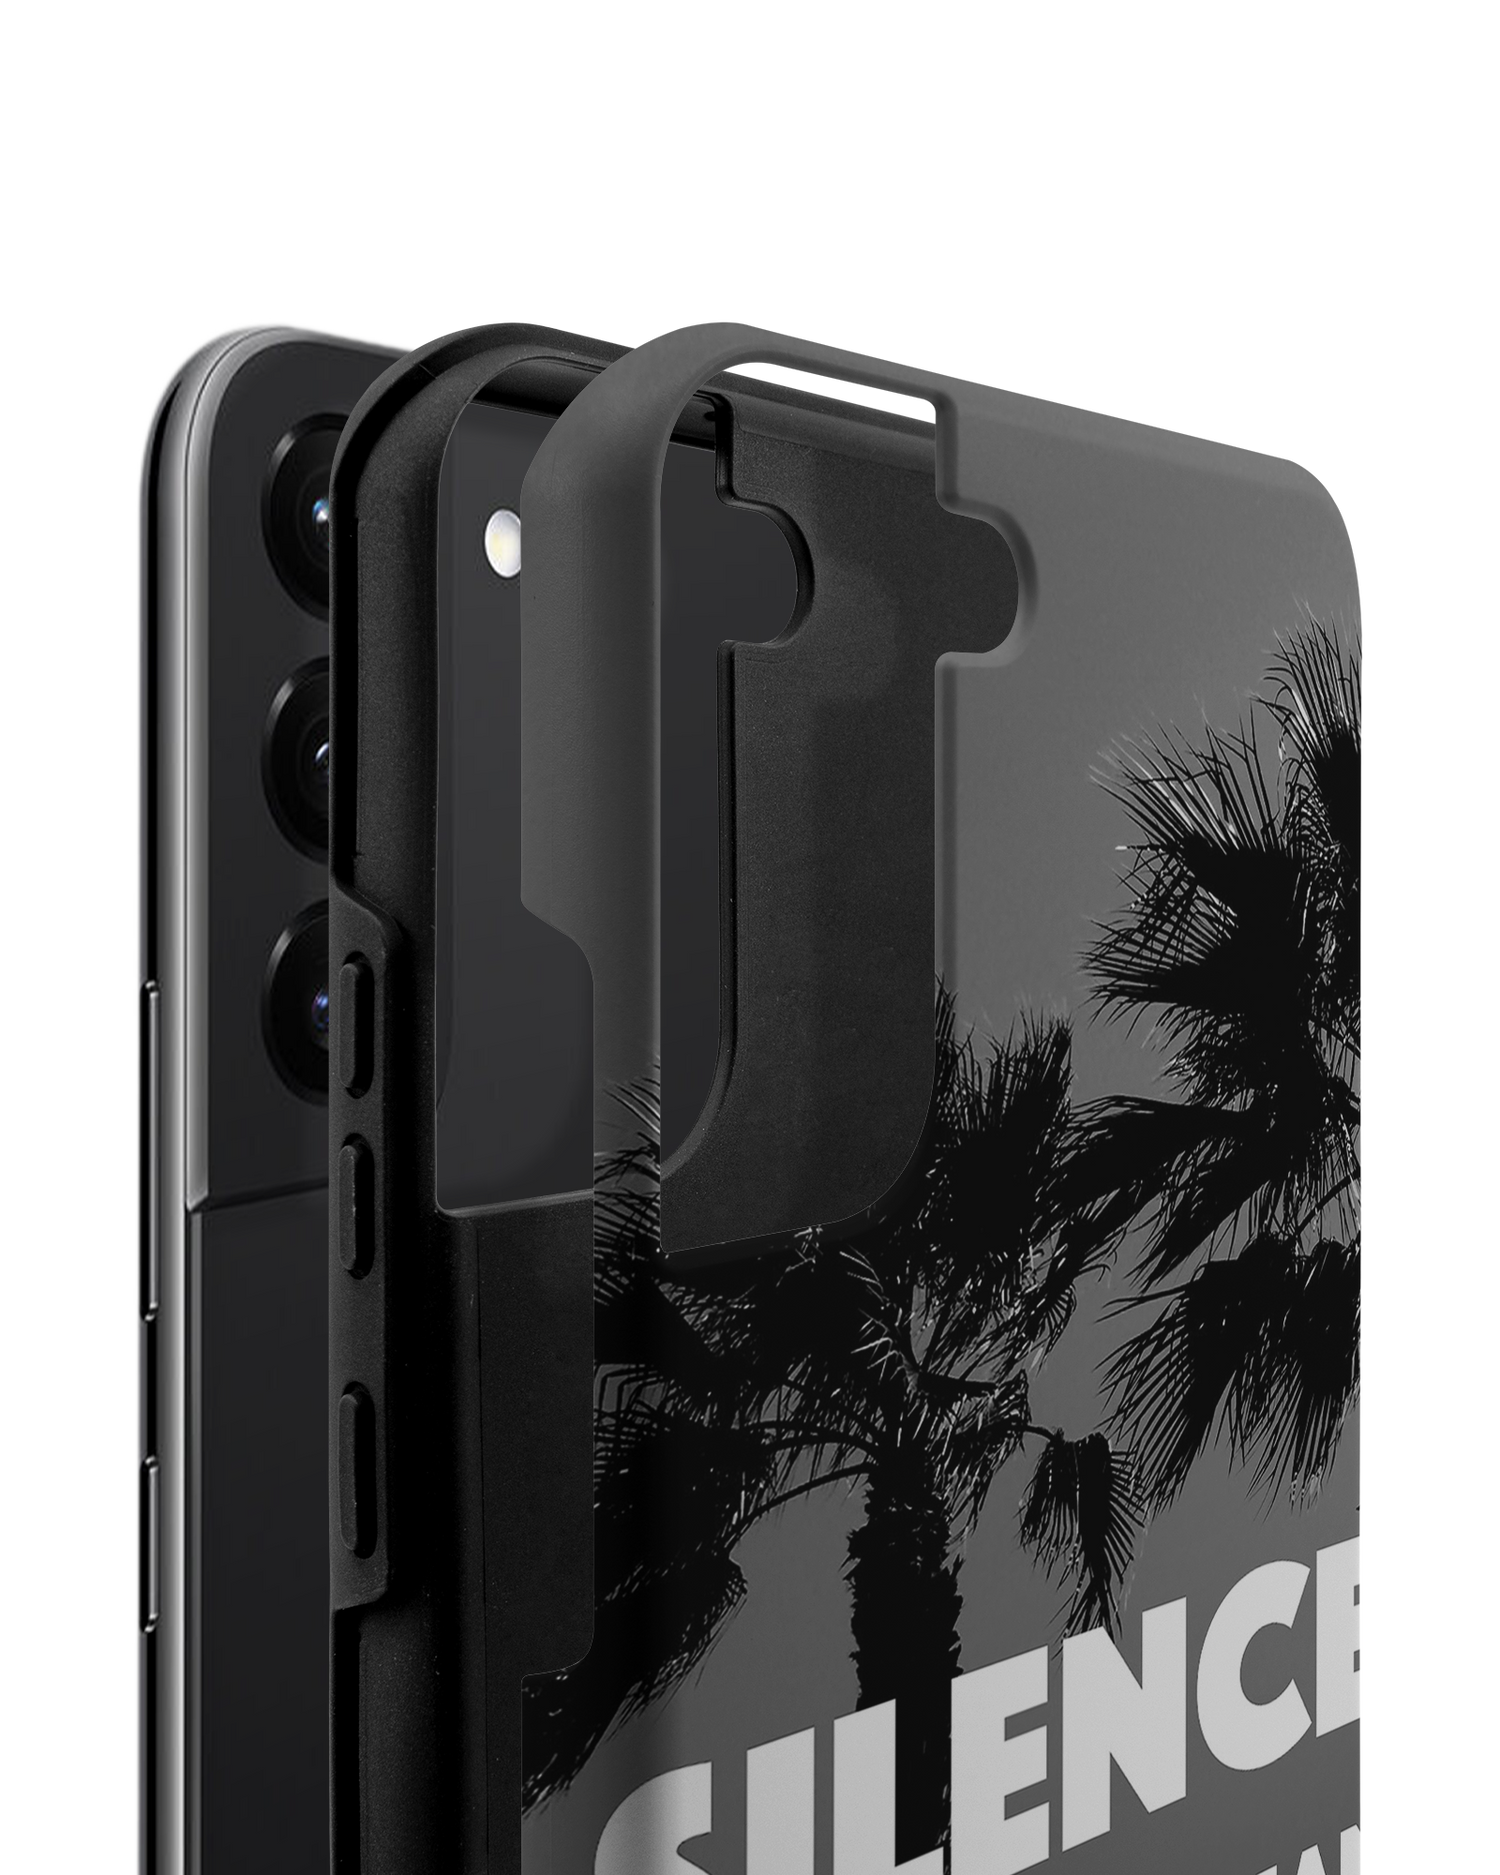 Silence is Better Premium Phone Case Samsung Galaxy S22 Plus 5G consisting of 2 parts